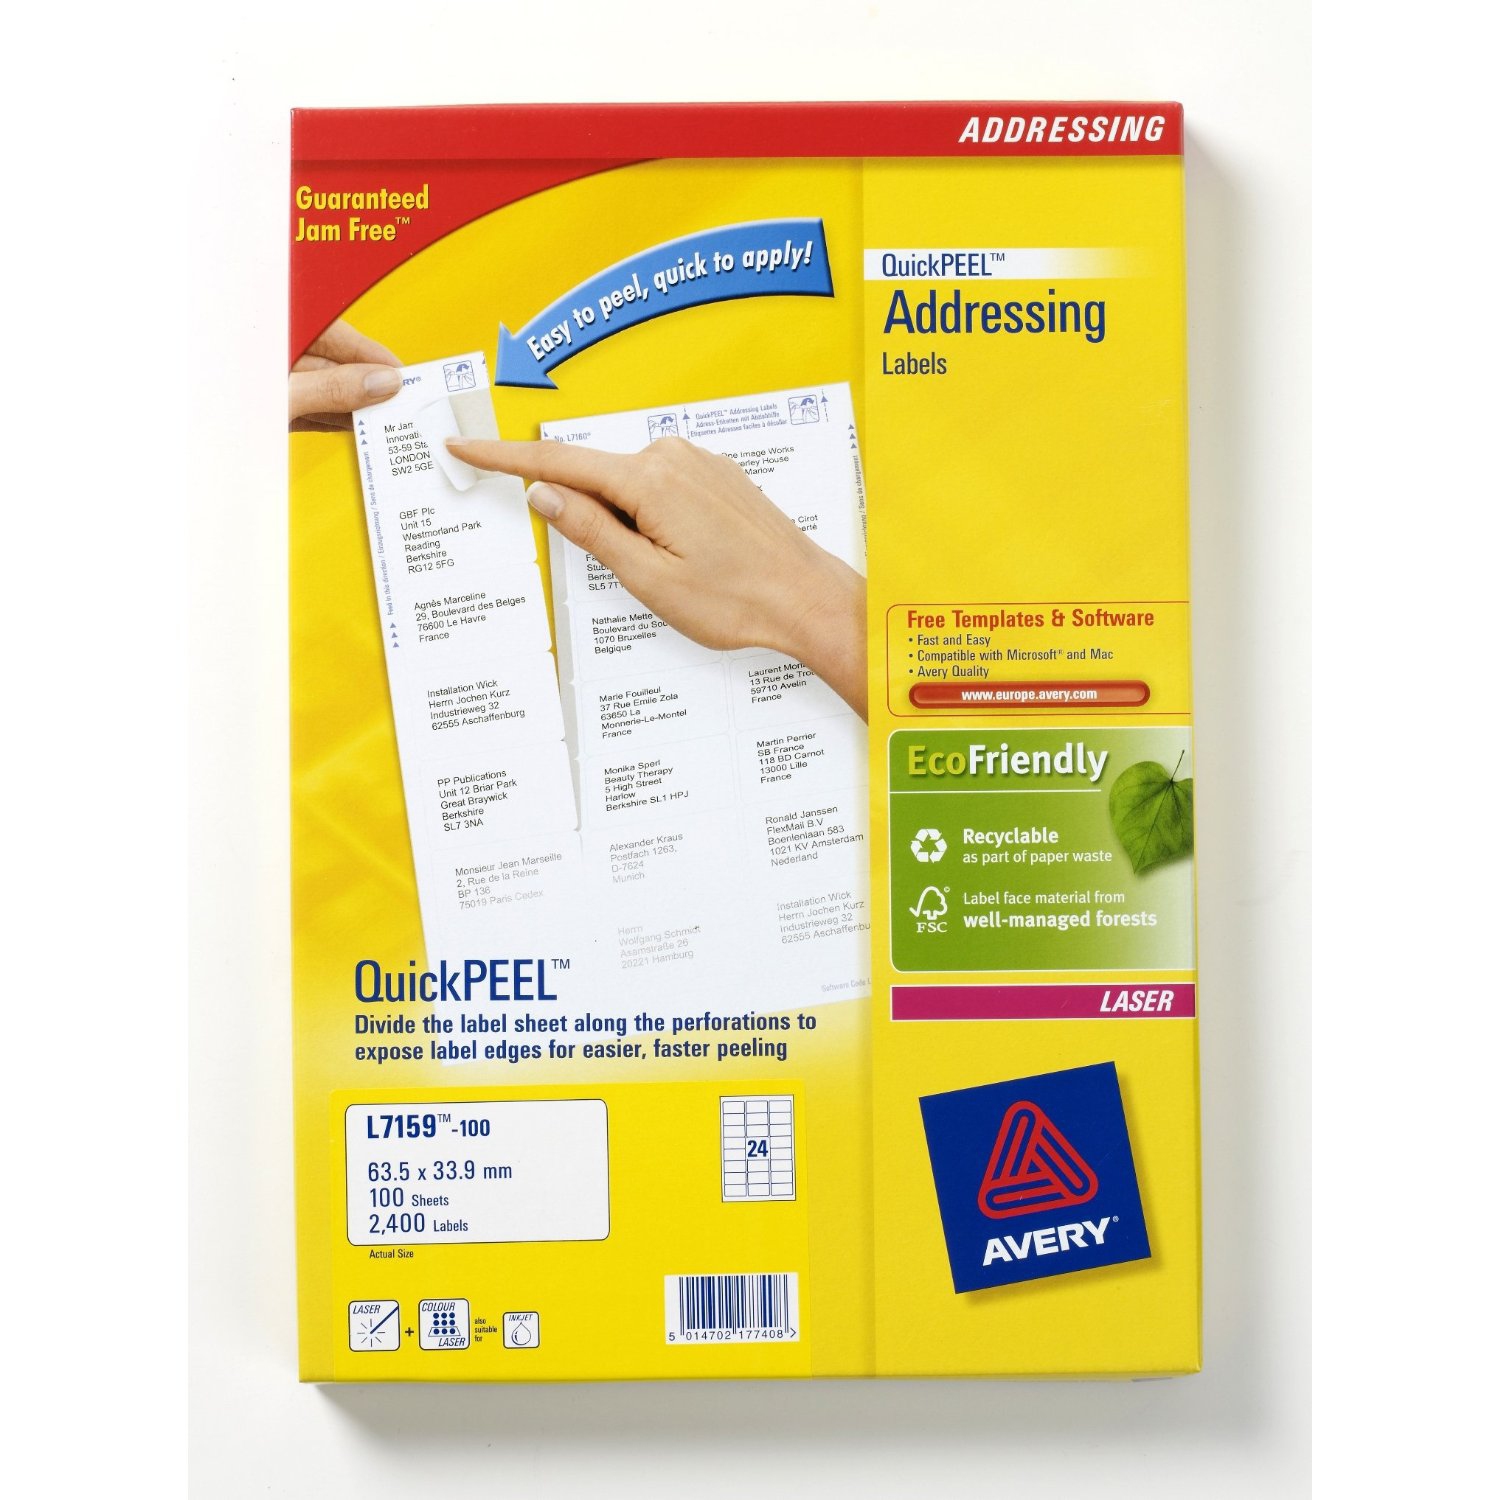 avery-l7159-100-addressing-label-white-345-in-distributor-wholesale